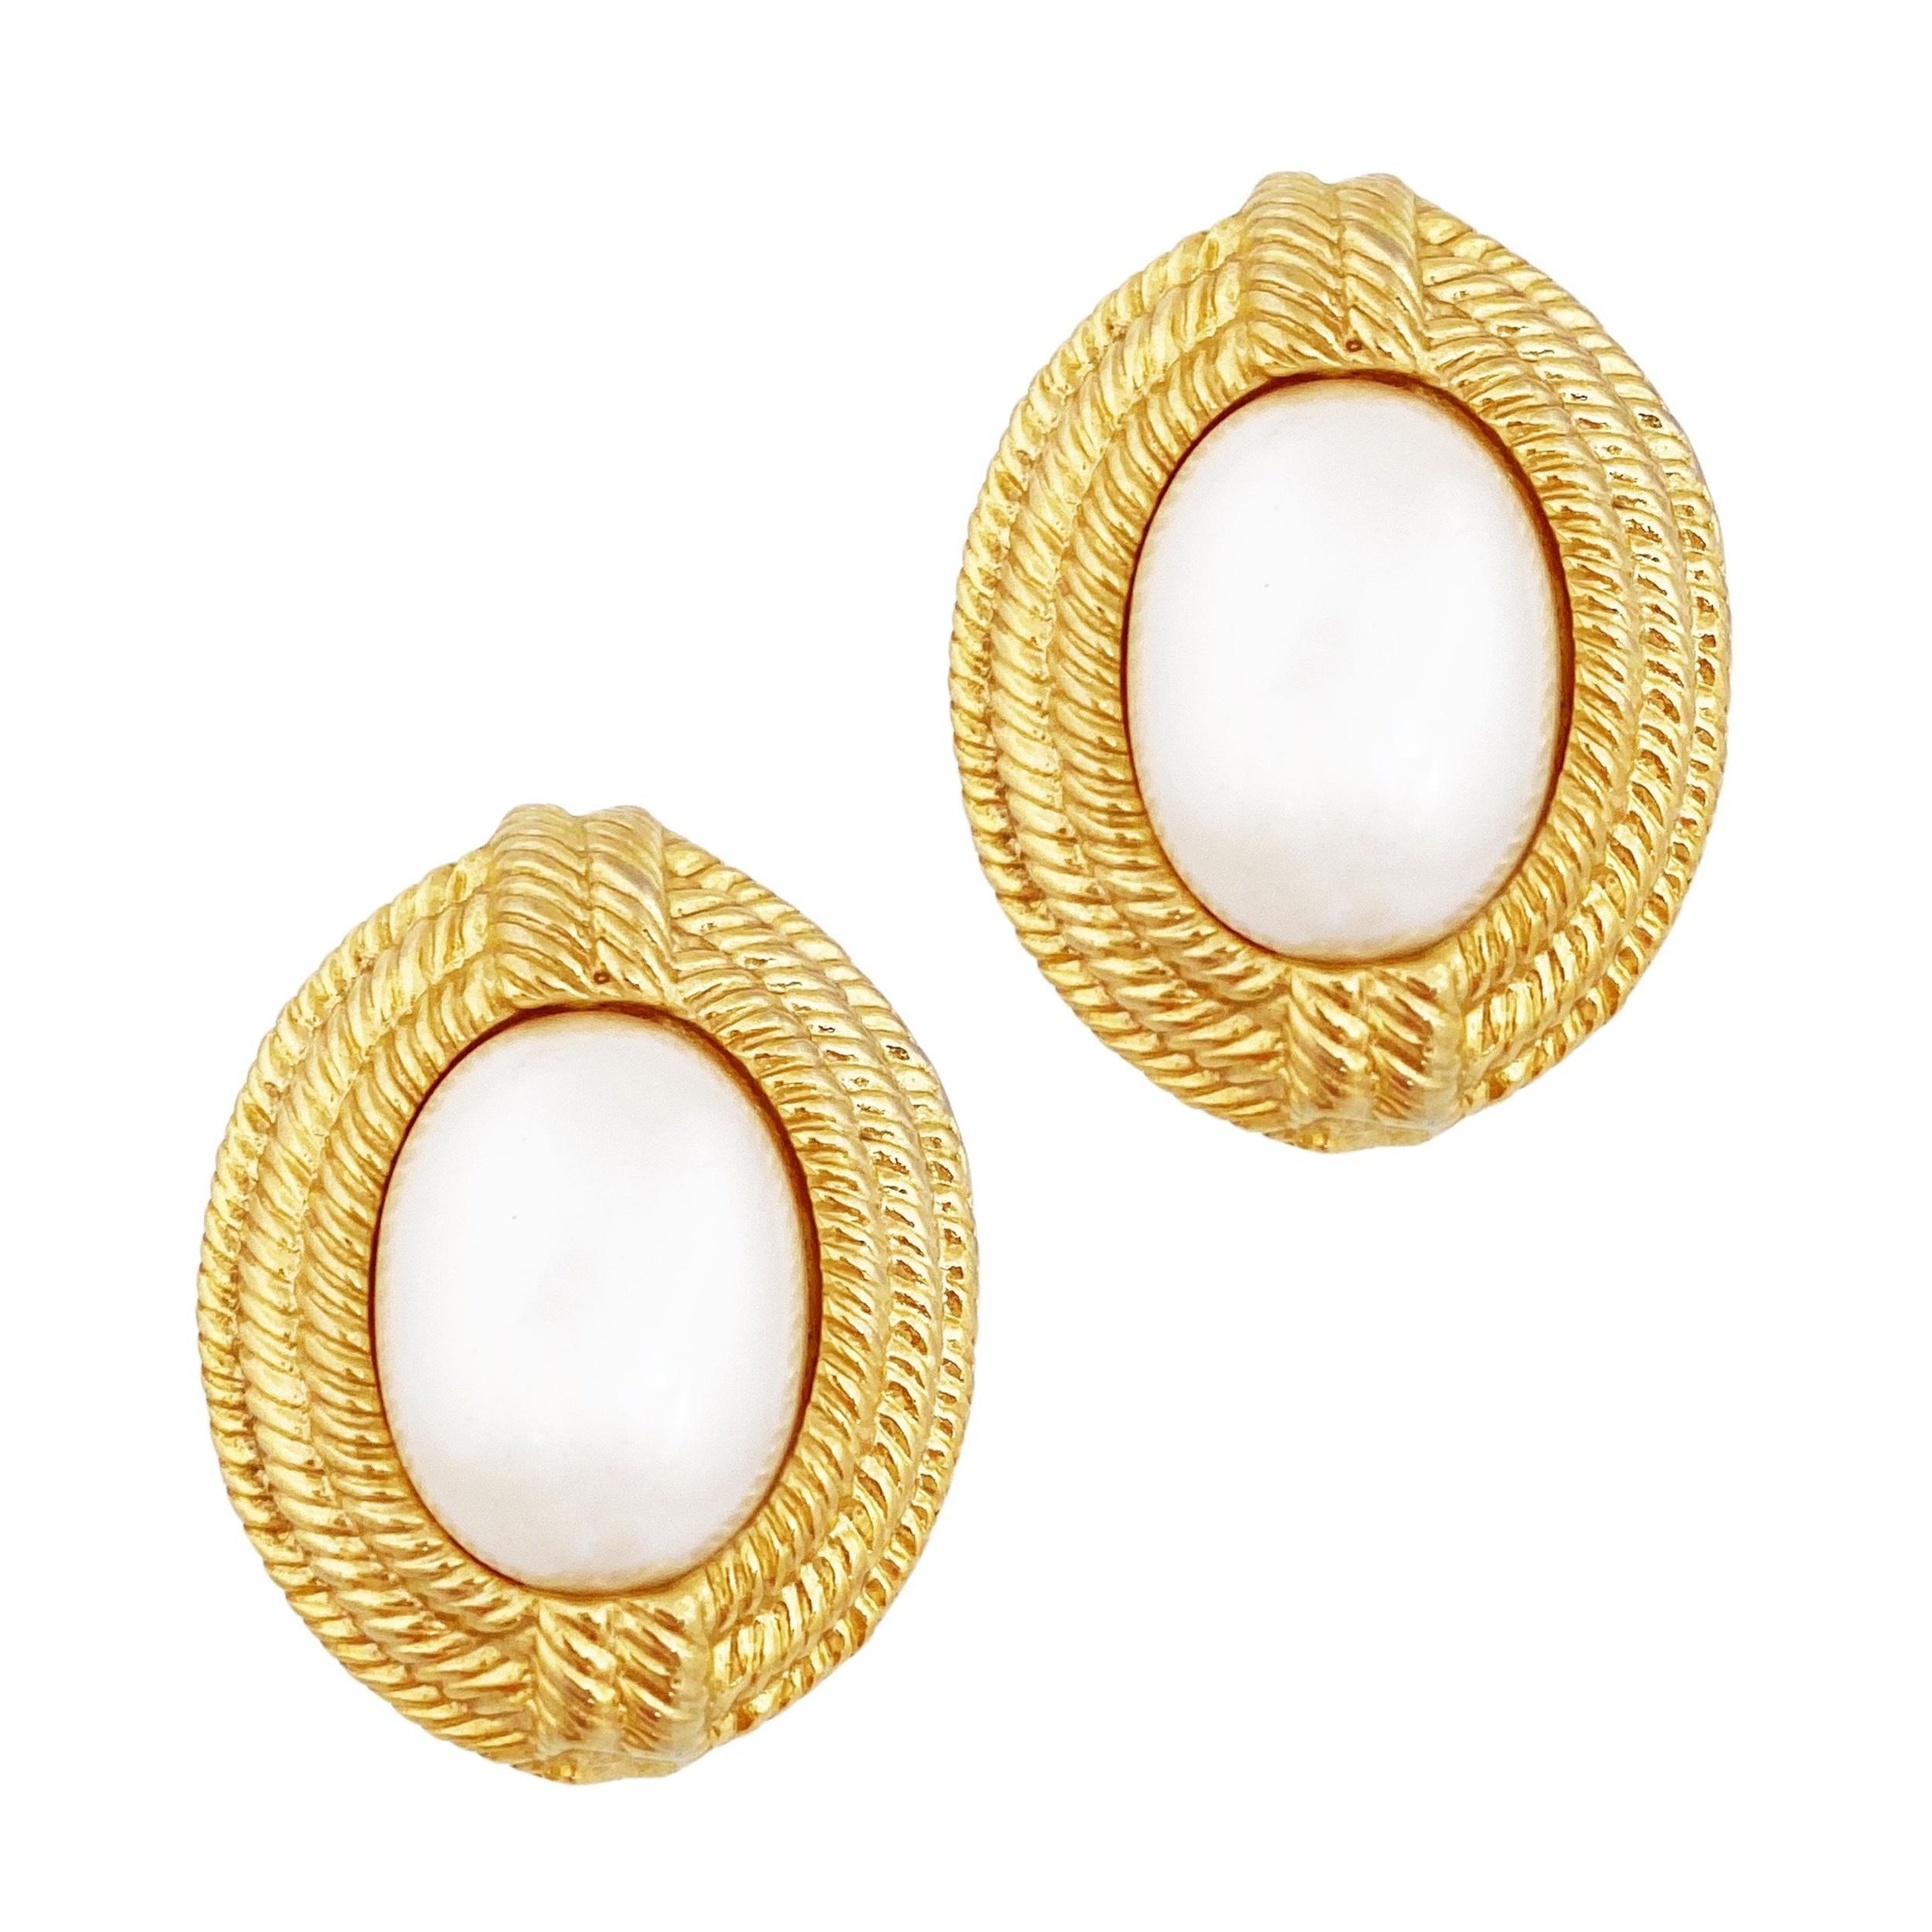 Gold Braid Texture Statement Earrings with Faux Pearls by Givenchy, 1980s For Sale